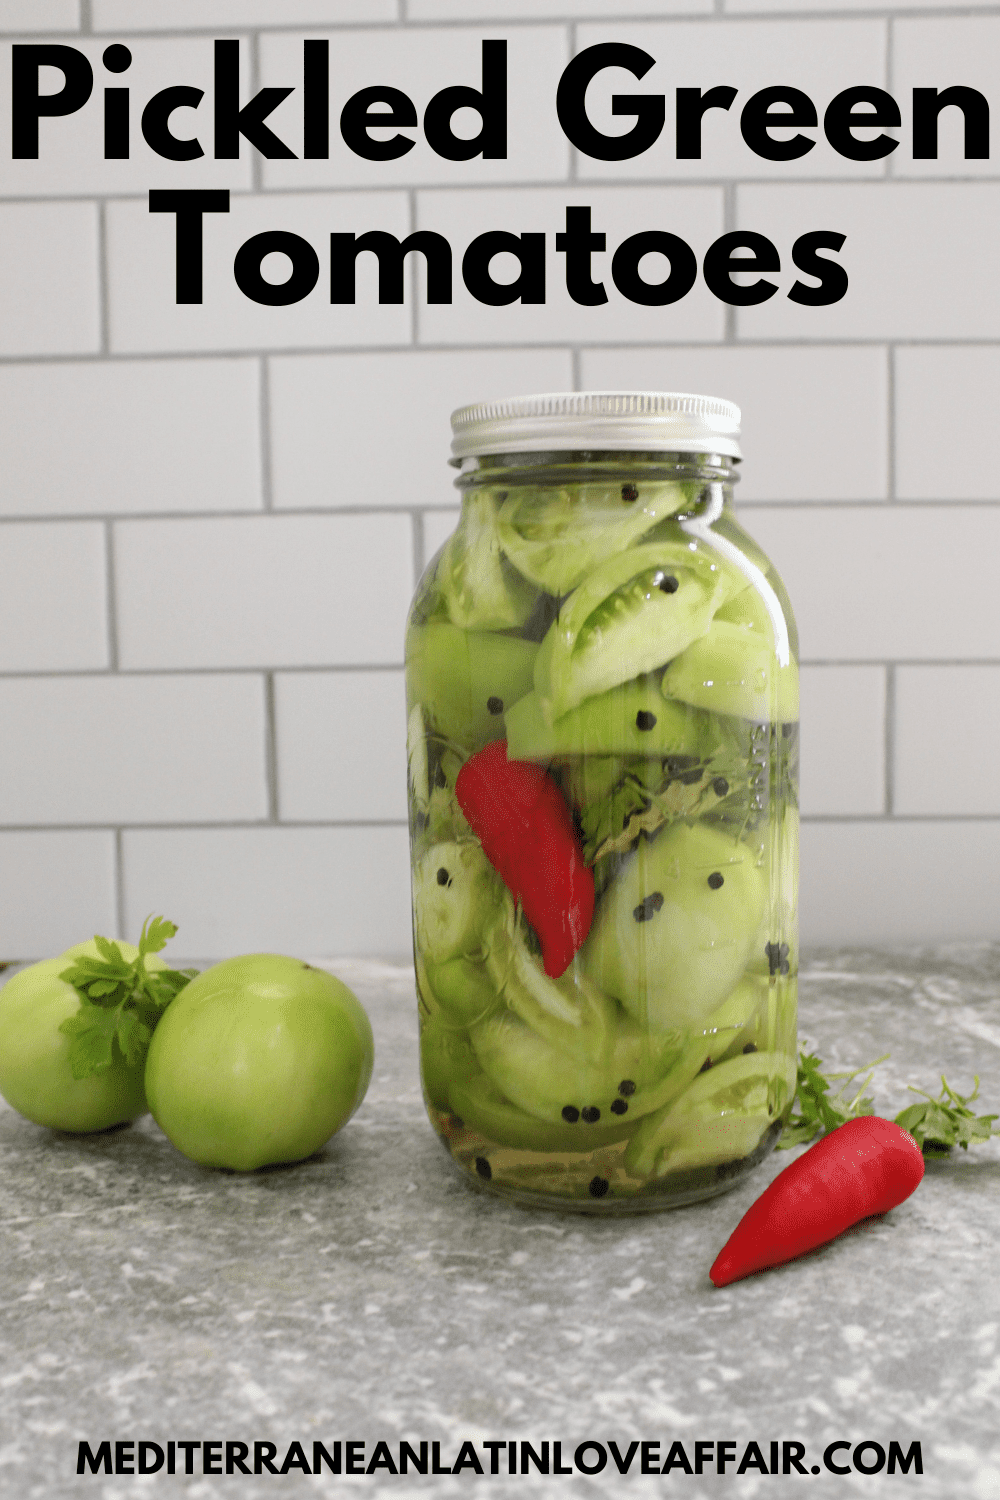 An image prepared for Pinterest, it shows a large mason jar of pickled green tomatoes. The image has a title bar on top and the website link in the bottom.